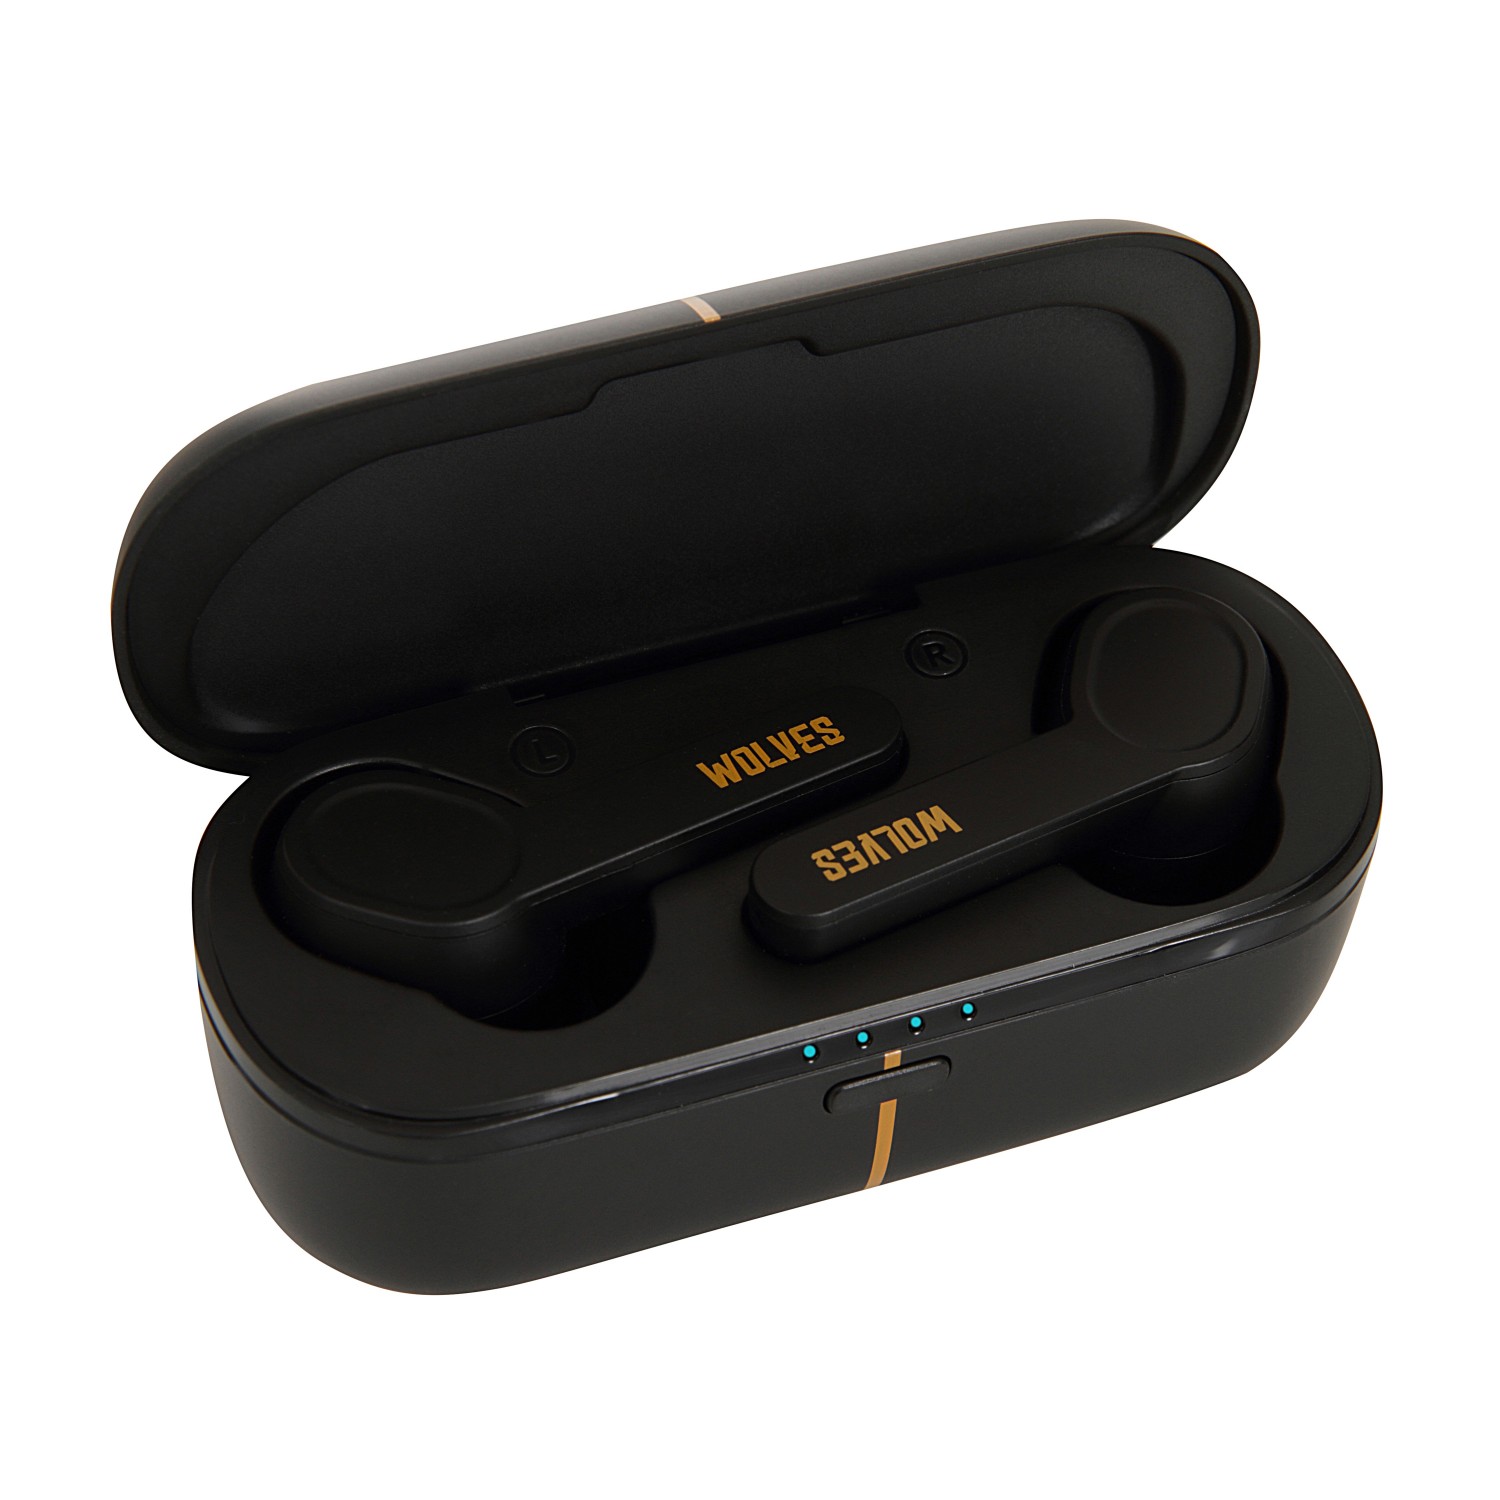 Moment Wireless Earphones - Wolves Edition - Black
Ergonomic non-slip earbuds are comfortable to wear and not easy to fall.

Bluetooth V5.0 chip High speed transmission, stable connection;
One-step automatic pairing Simple operation, kids can do it;
Touch Control Various functions are at your fingertips with one click;
Slip resistantandwaterproof Not easy to fall, first choice for daily exercise;
Type-C fast charging Its convenient and fast to charge, and it can play more than 4 hours on one charge.
